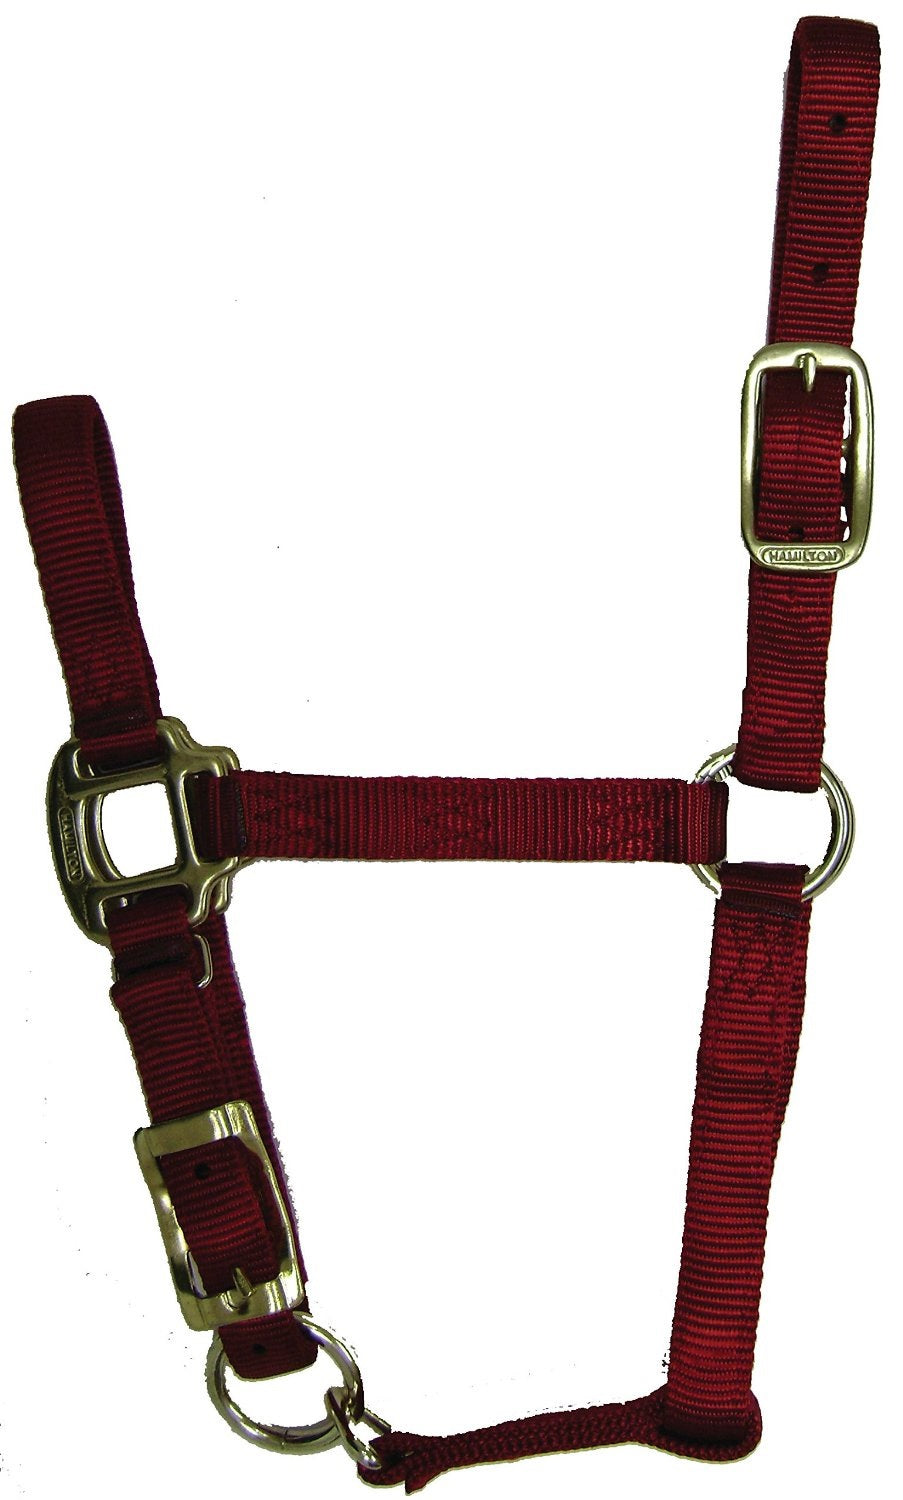 buy horse tack at cheap rate in bulk. wholesale & retail farm tools & supplies store.